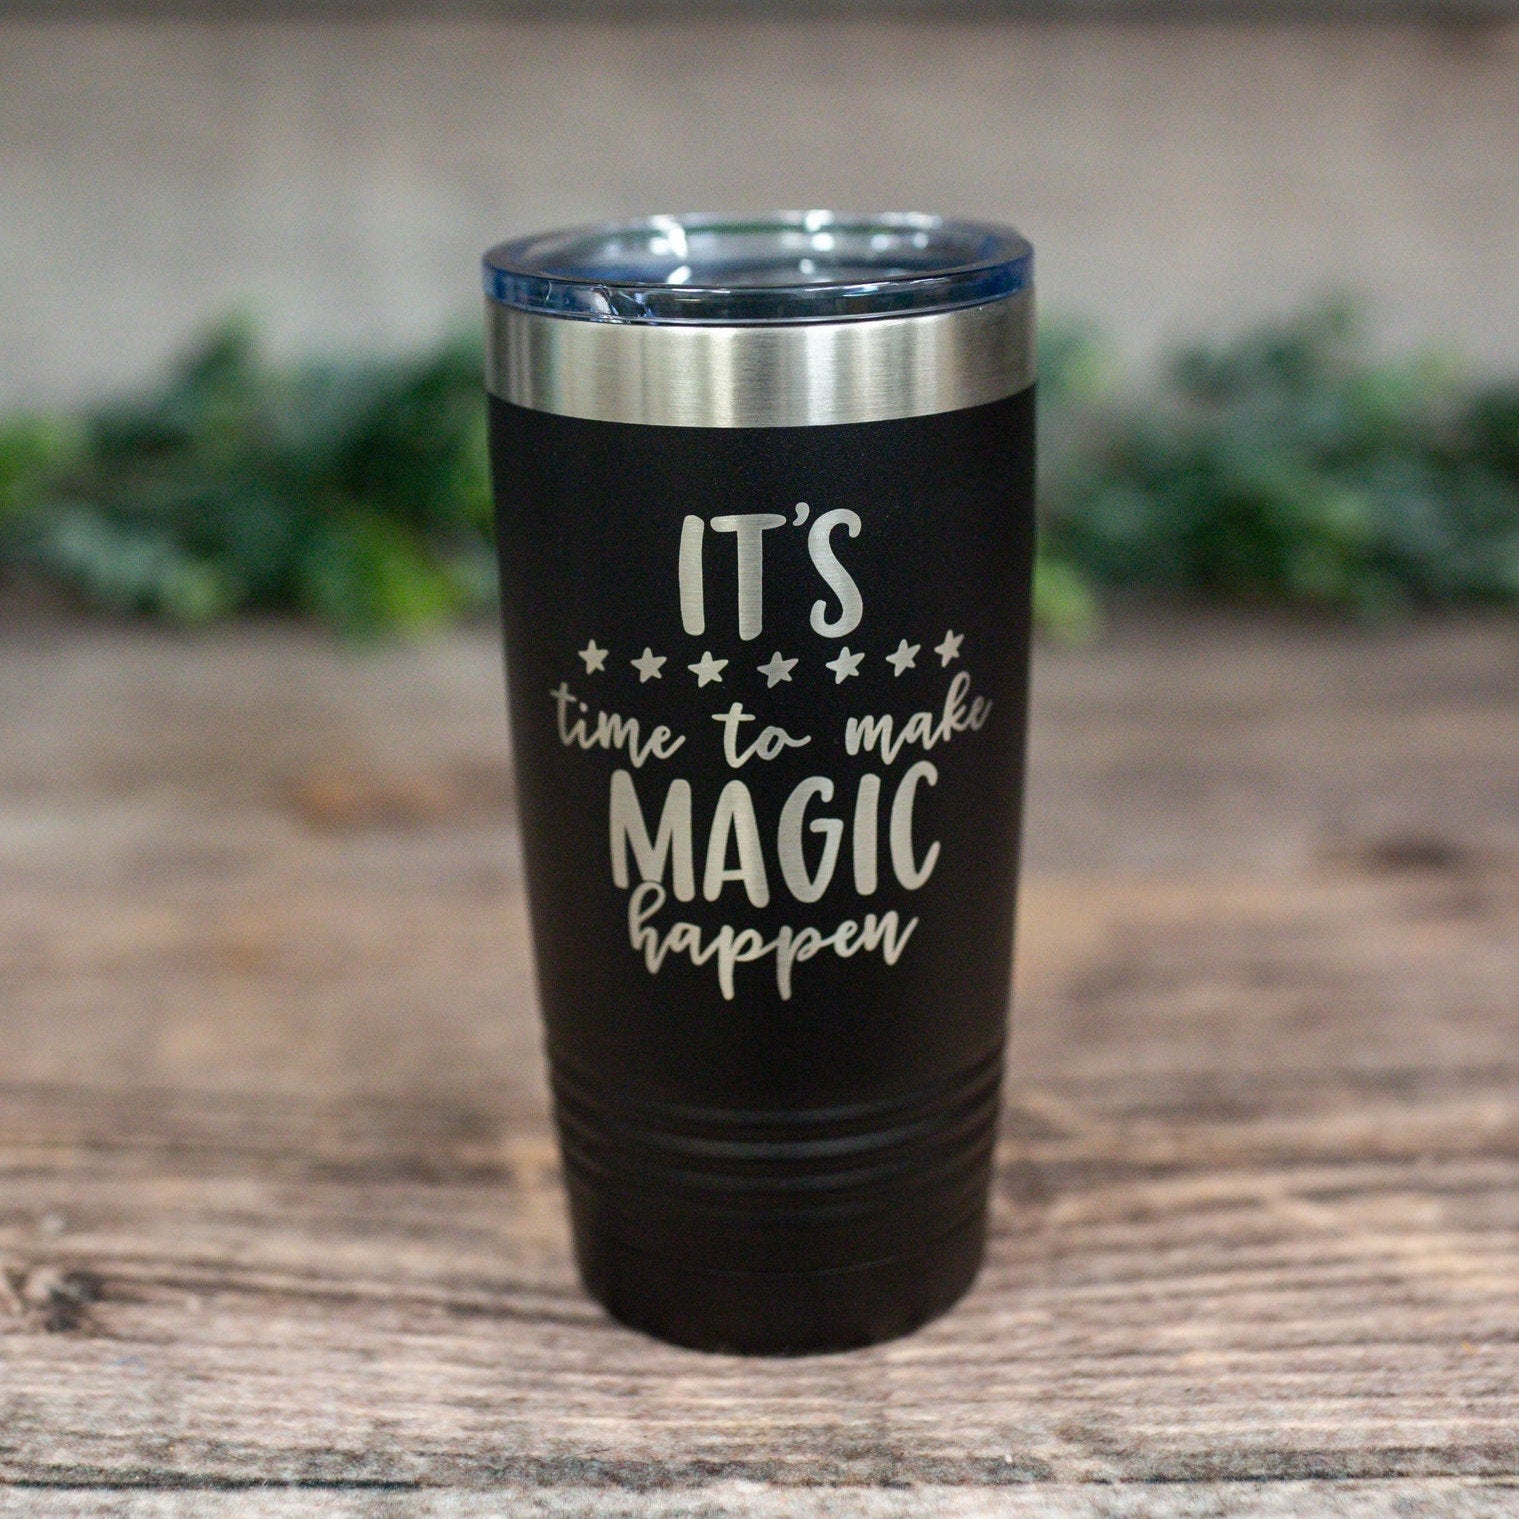 https://3cetching.com/wp-content/uploads/2021/07/its-time-to-make-magic-happen-engraved-stainless-steel-tumbler-insulated-travel-mug-for-him-magic-gift-mug-60f71945.jpg